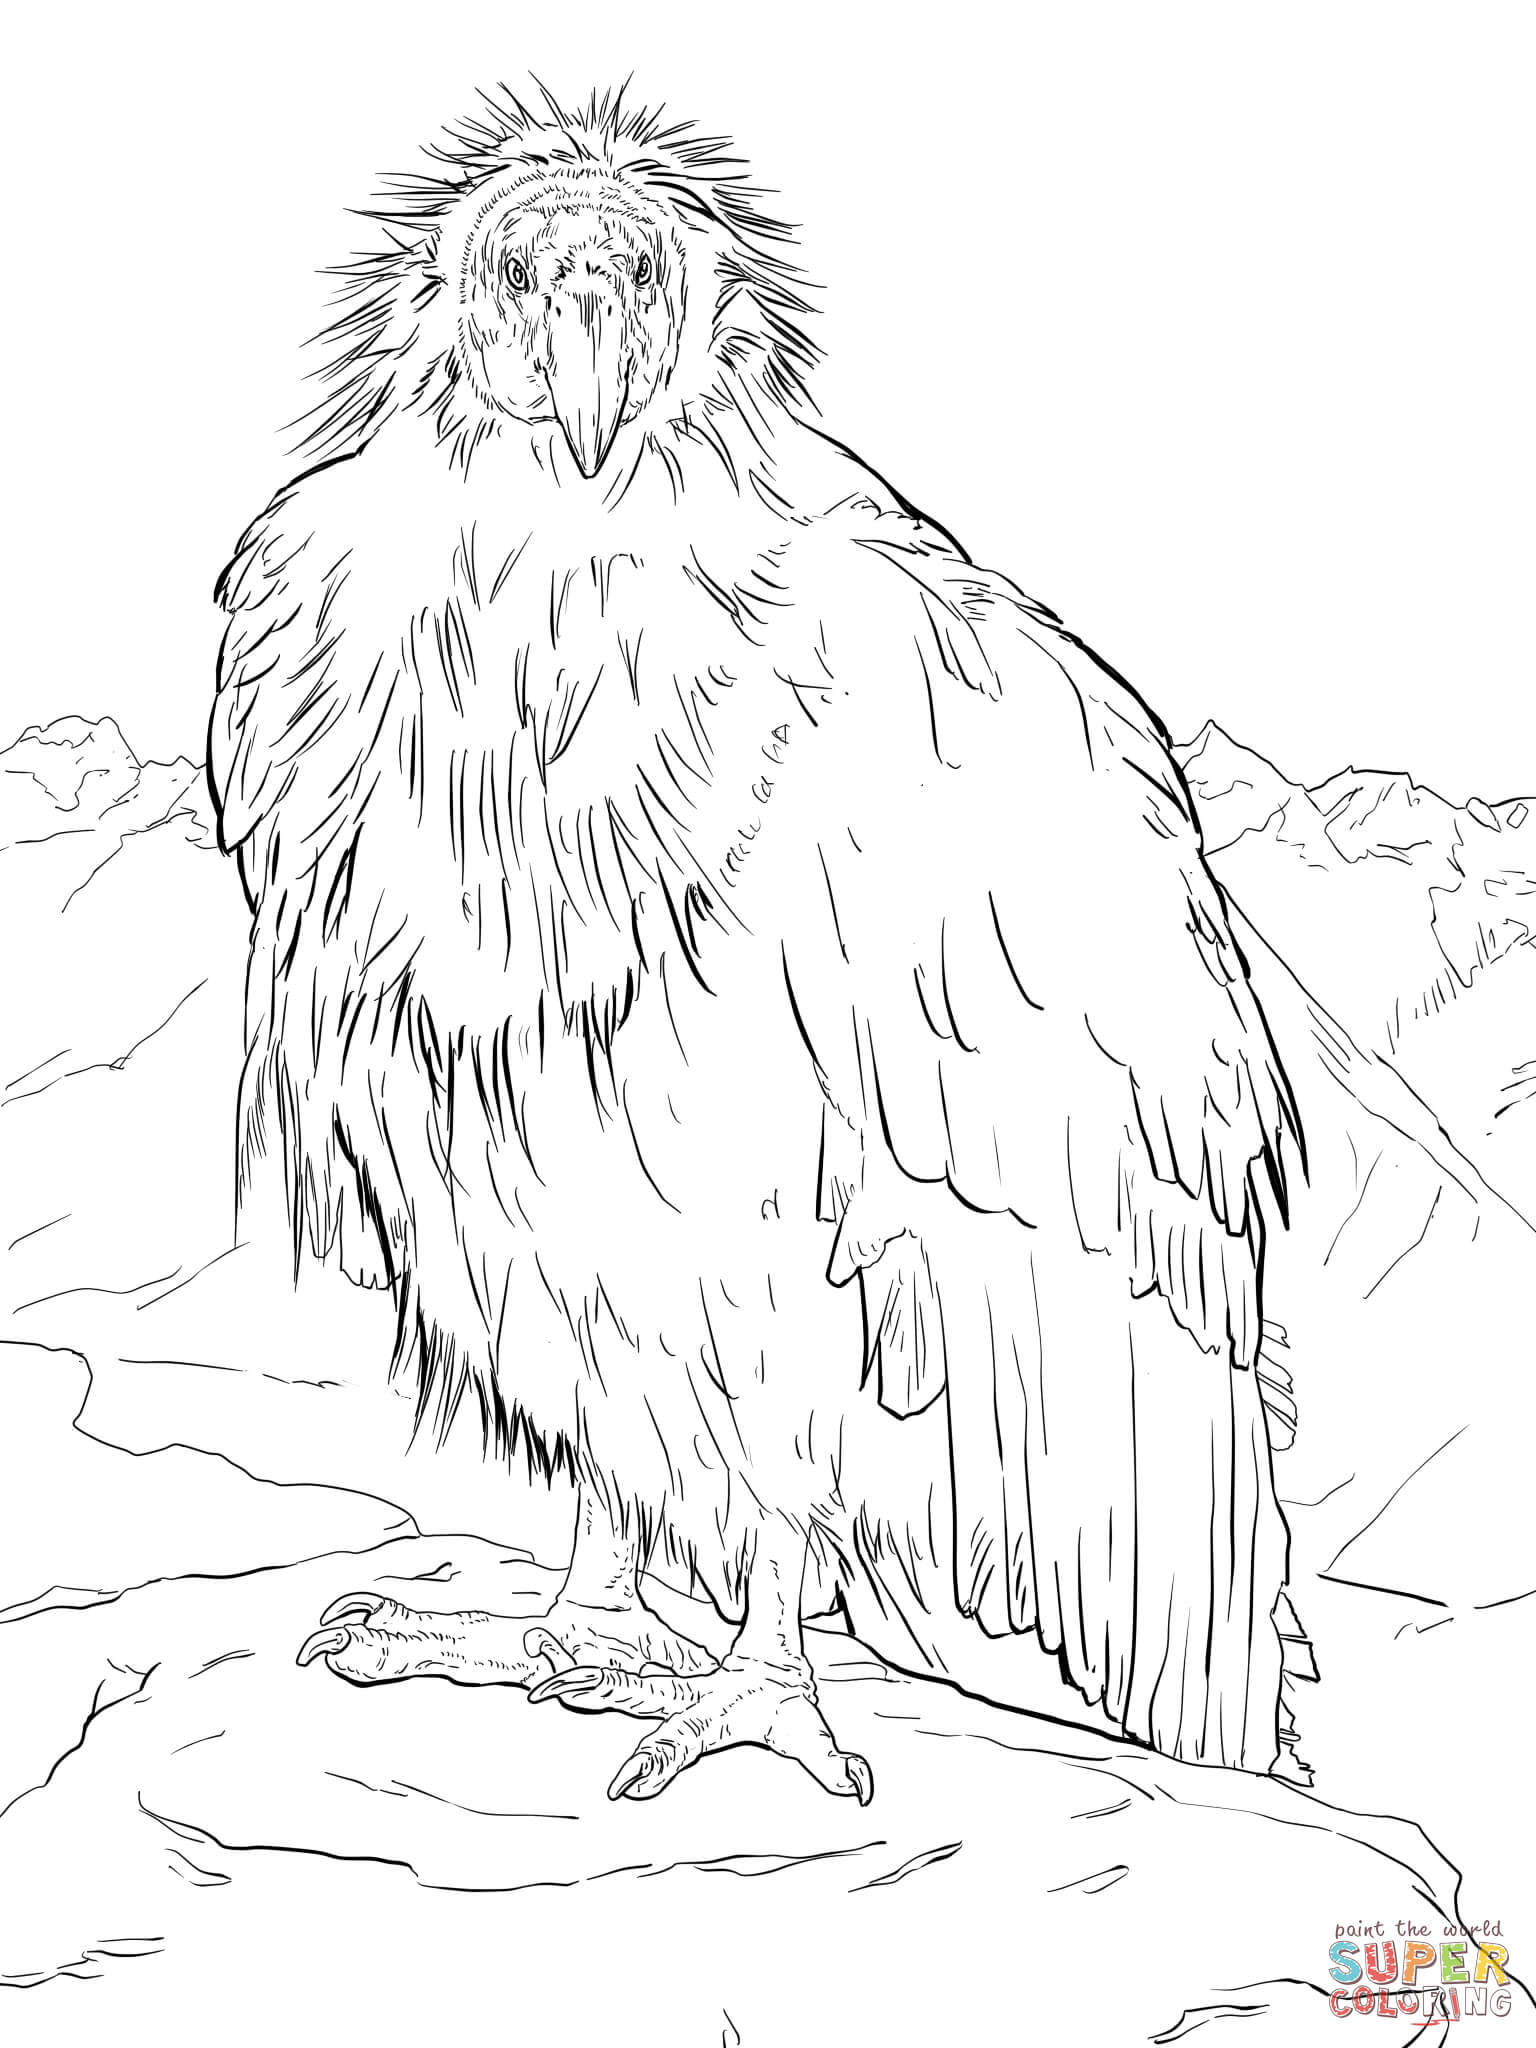 California Condor Takes a Break at the Grand Canyon coloring page | Free  Printable Coloring Pages